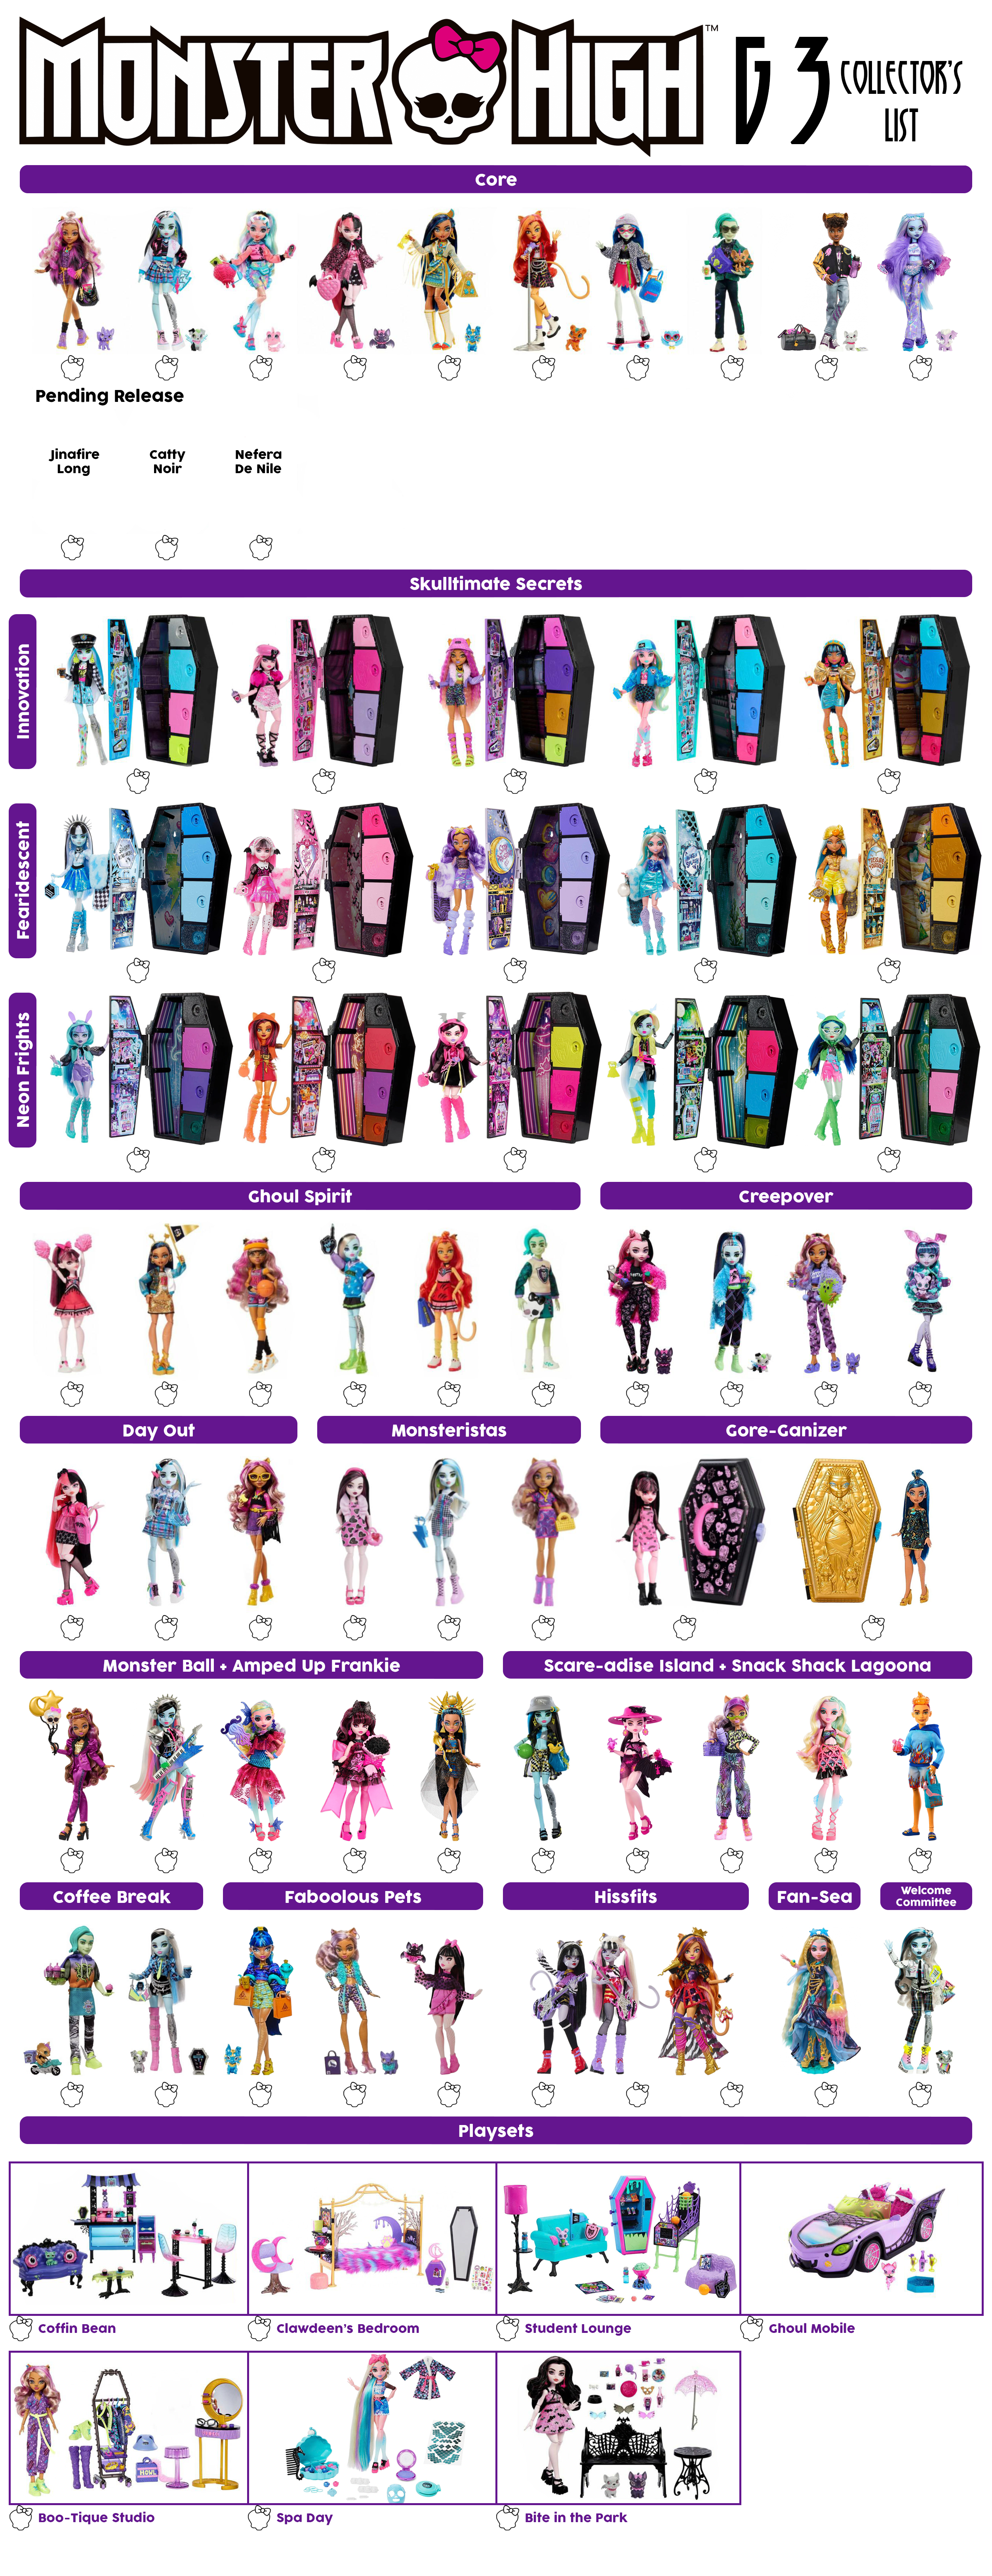 Monster High G3 Collector List by SyntheticRain7 on DeviantArt